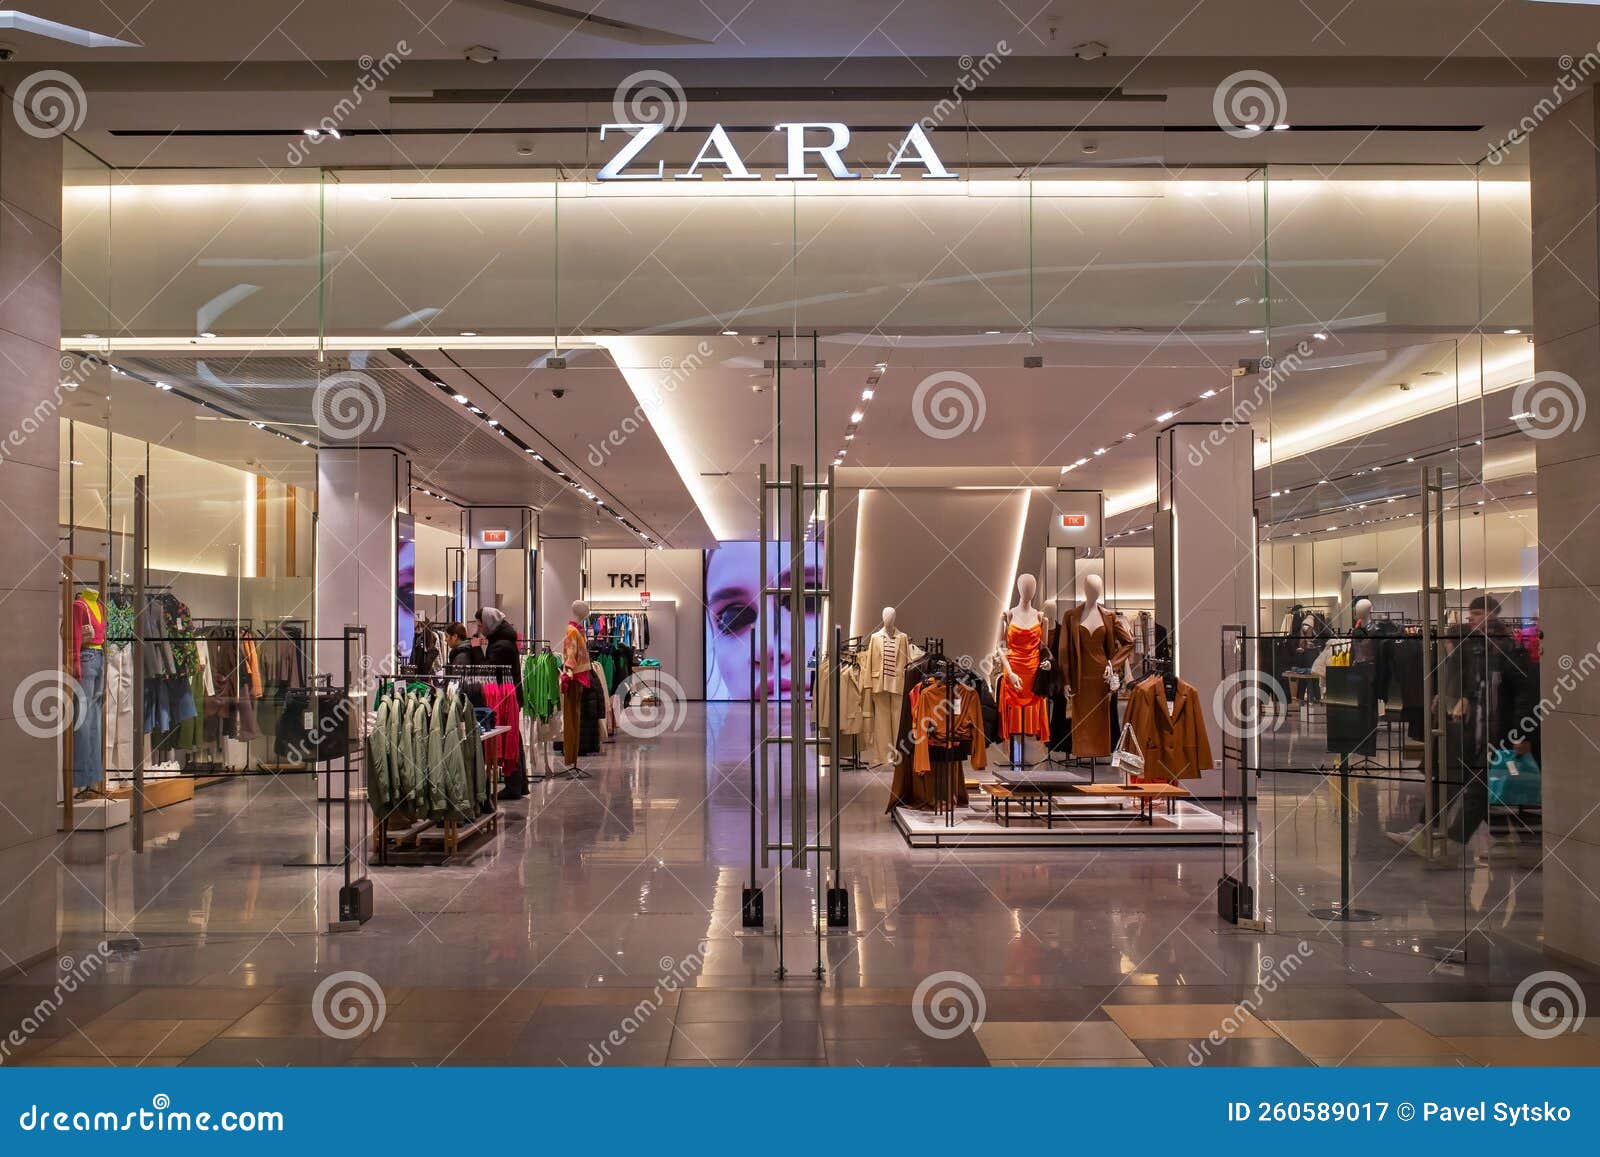 Zara Fashion Store in Shopping Center. Brand Logo and View Inside the ...